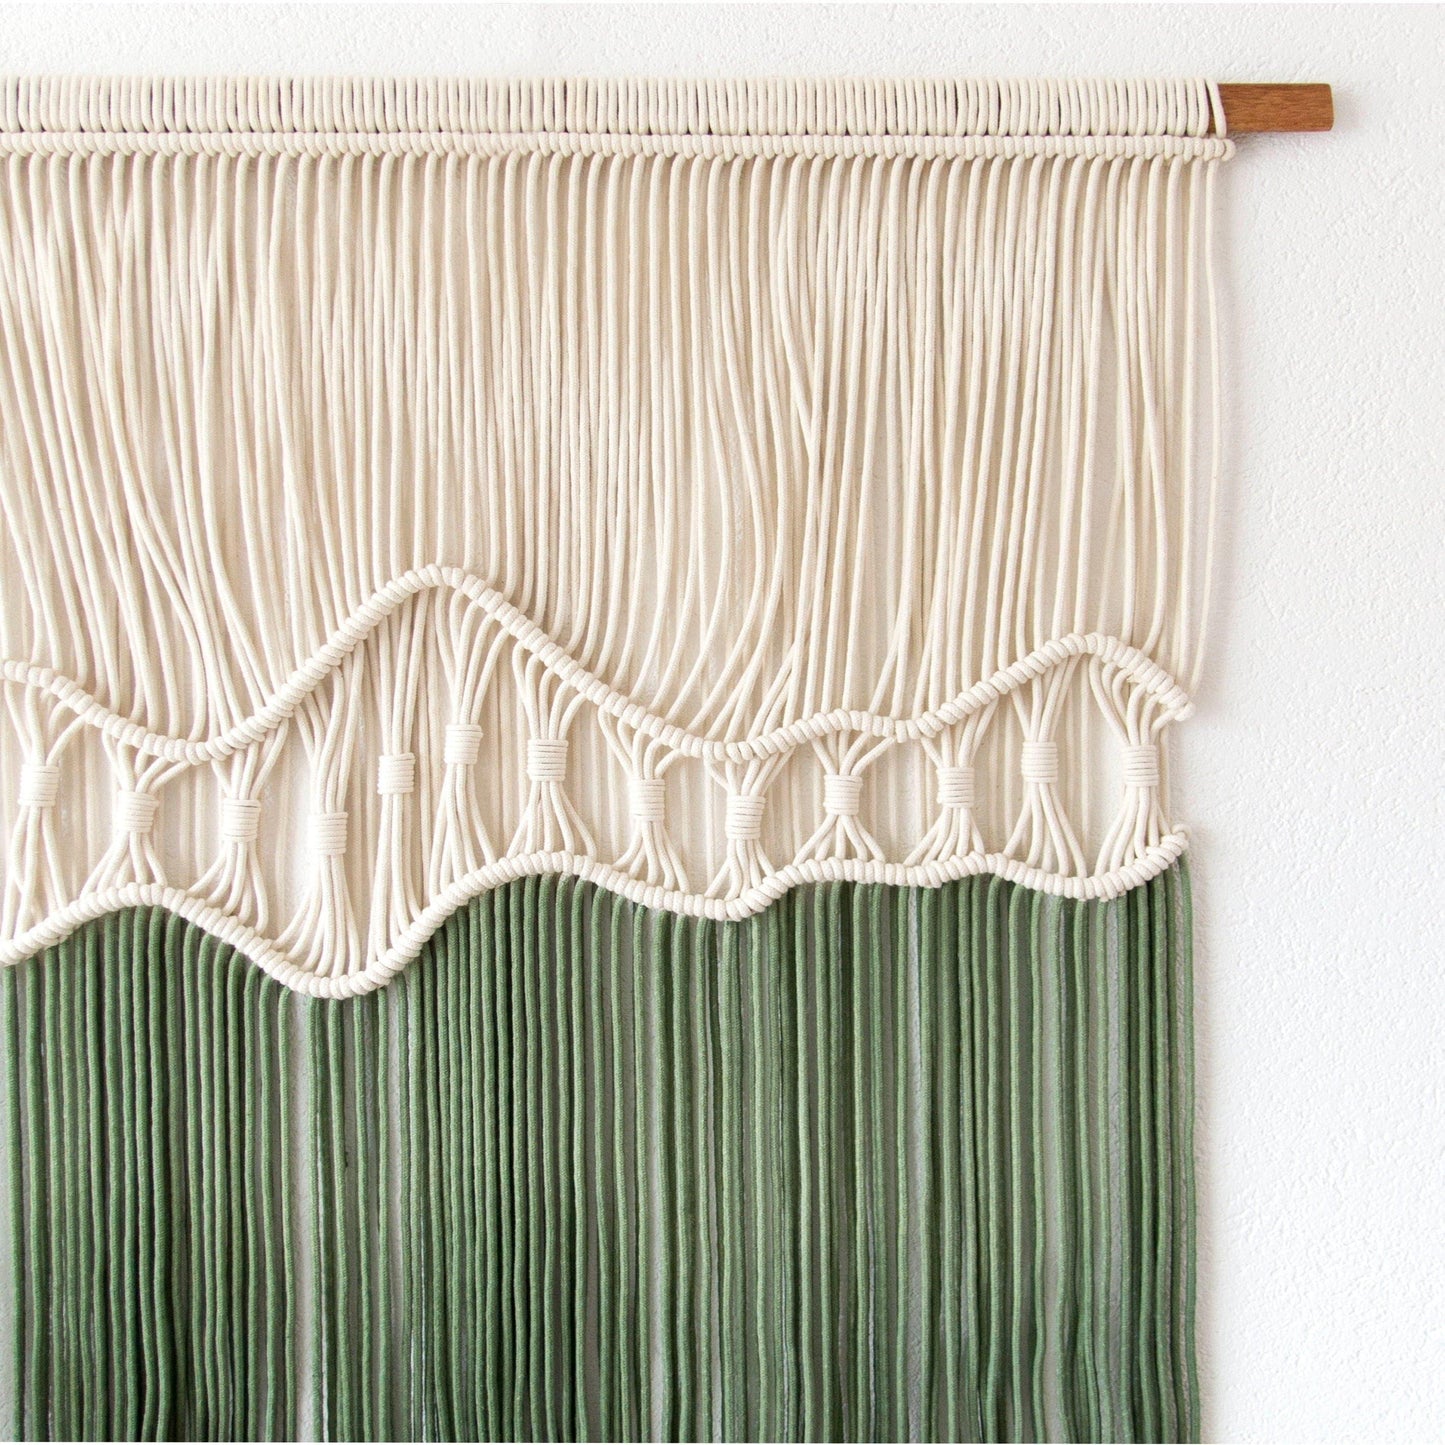 Extra Large Hand Woven Macrame Wall Hanging - dyed in PinkGreen - MAIA HOMES